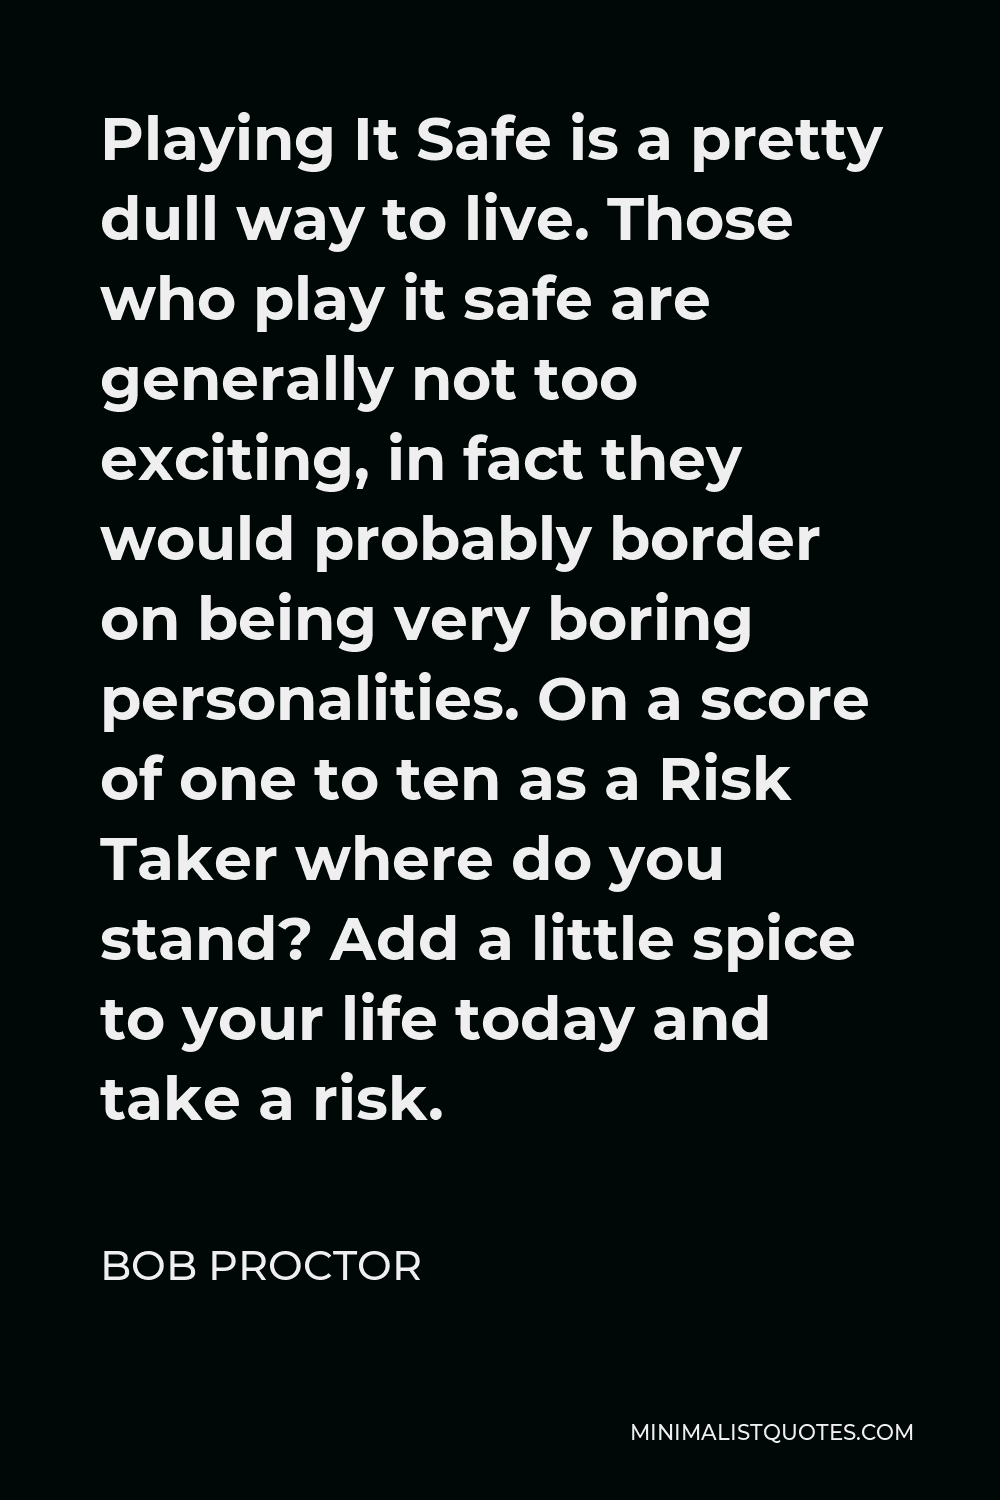 Bob Proctor Quote - Playing It Safe is a pretty dull way to live. Those who play it safe are generally not too exciting, in fact they would probably border on being very boring personalities. On a score of one to ten as a Risk Taker where do you stand? Add a little spice to your life today and take a risk.